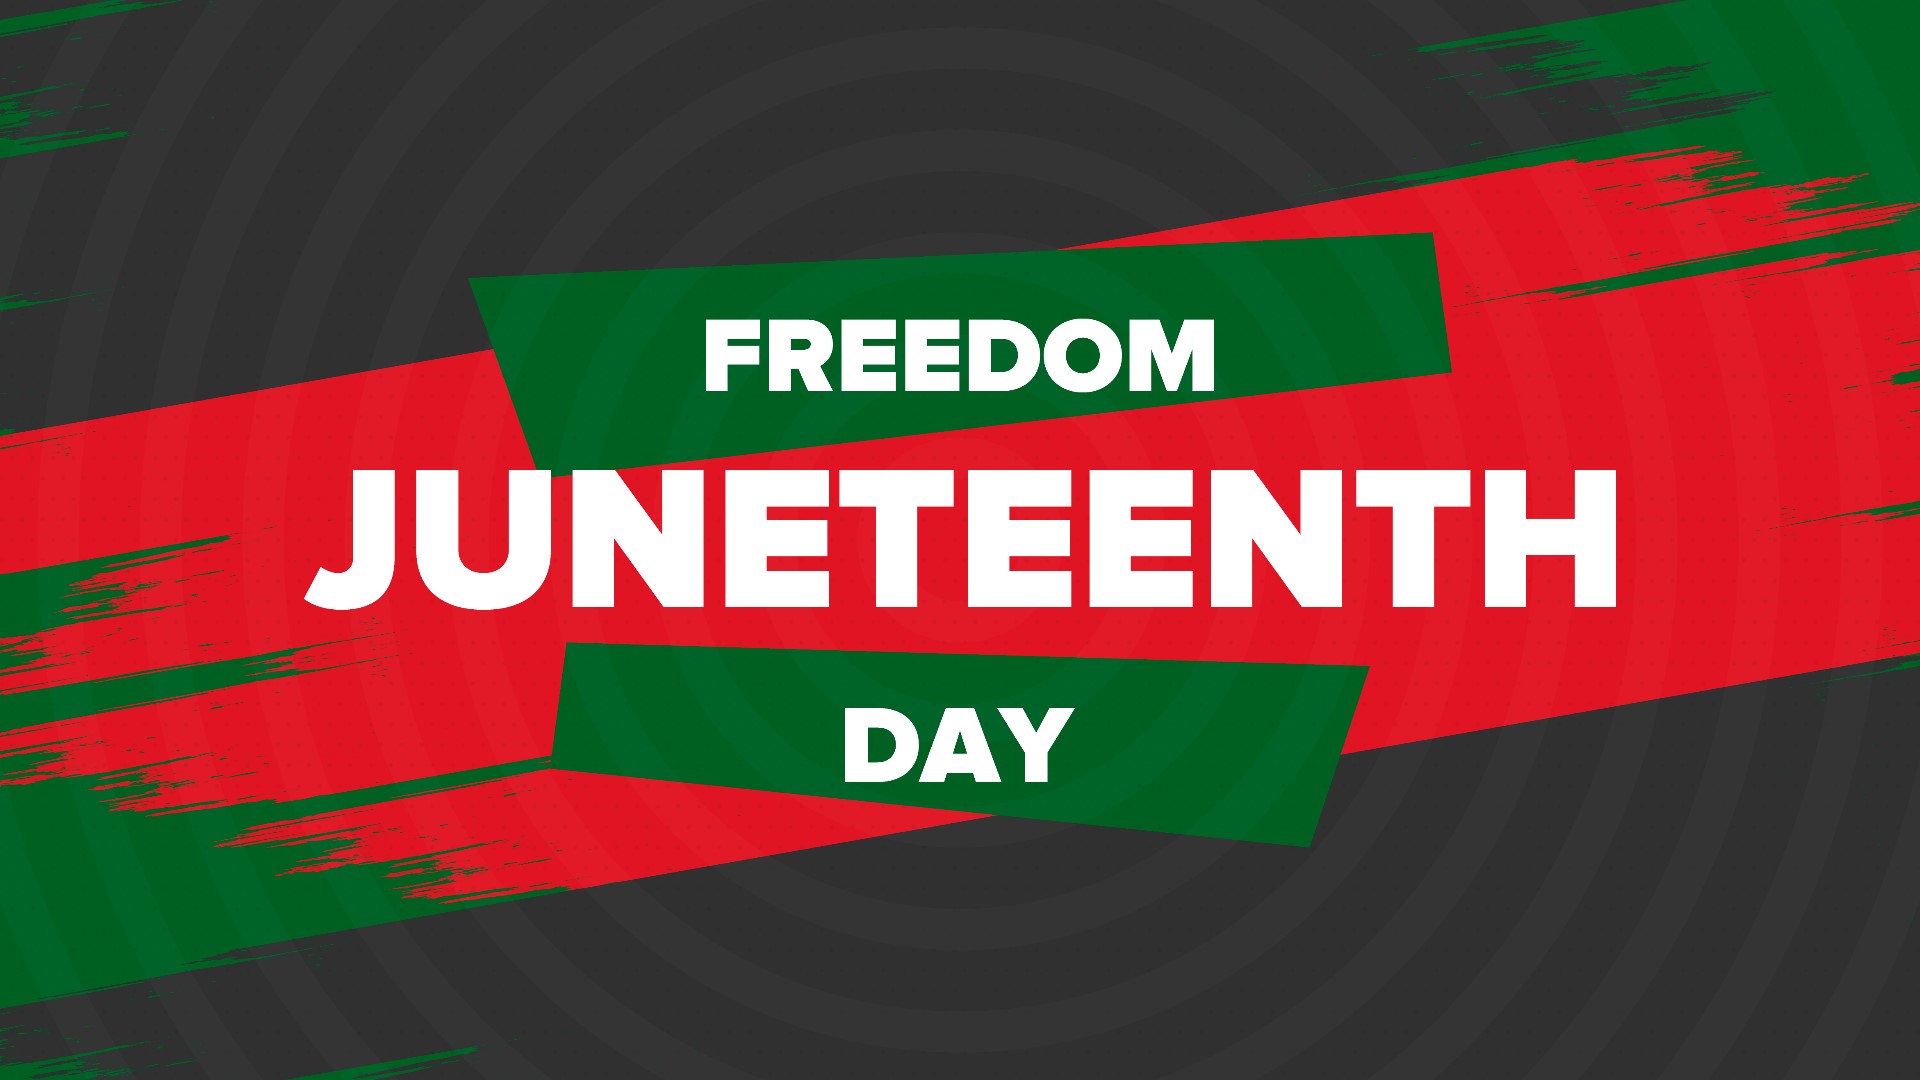 Texas was the first state to declare Juneteenth a holiday in 1980 although the date it commemorates goes back many decades.